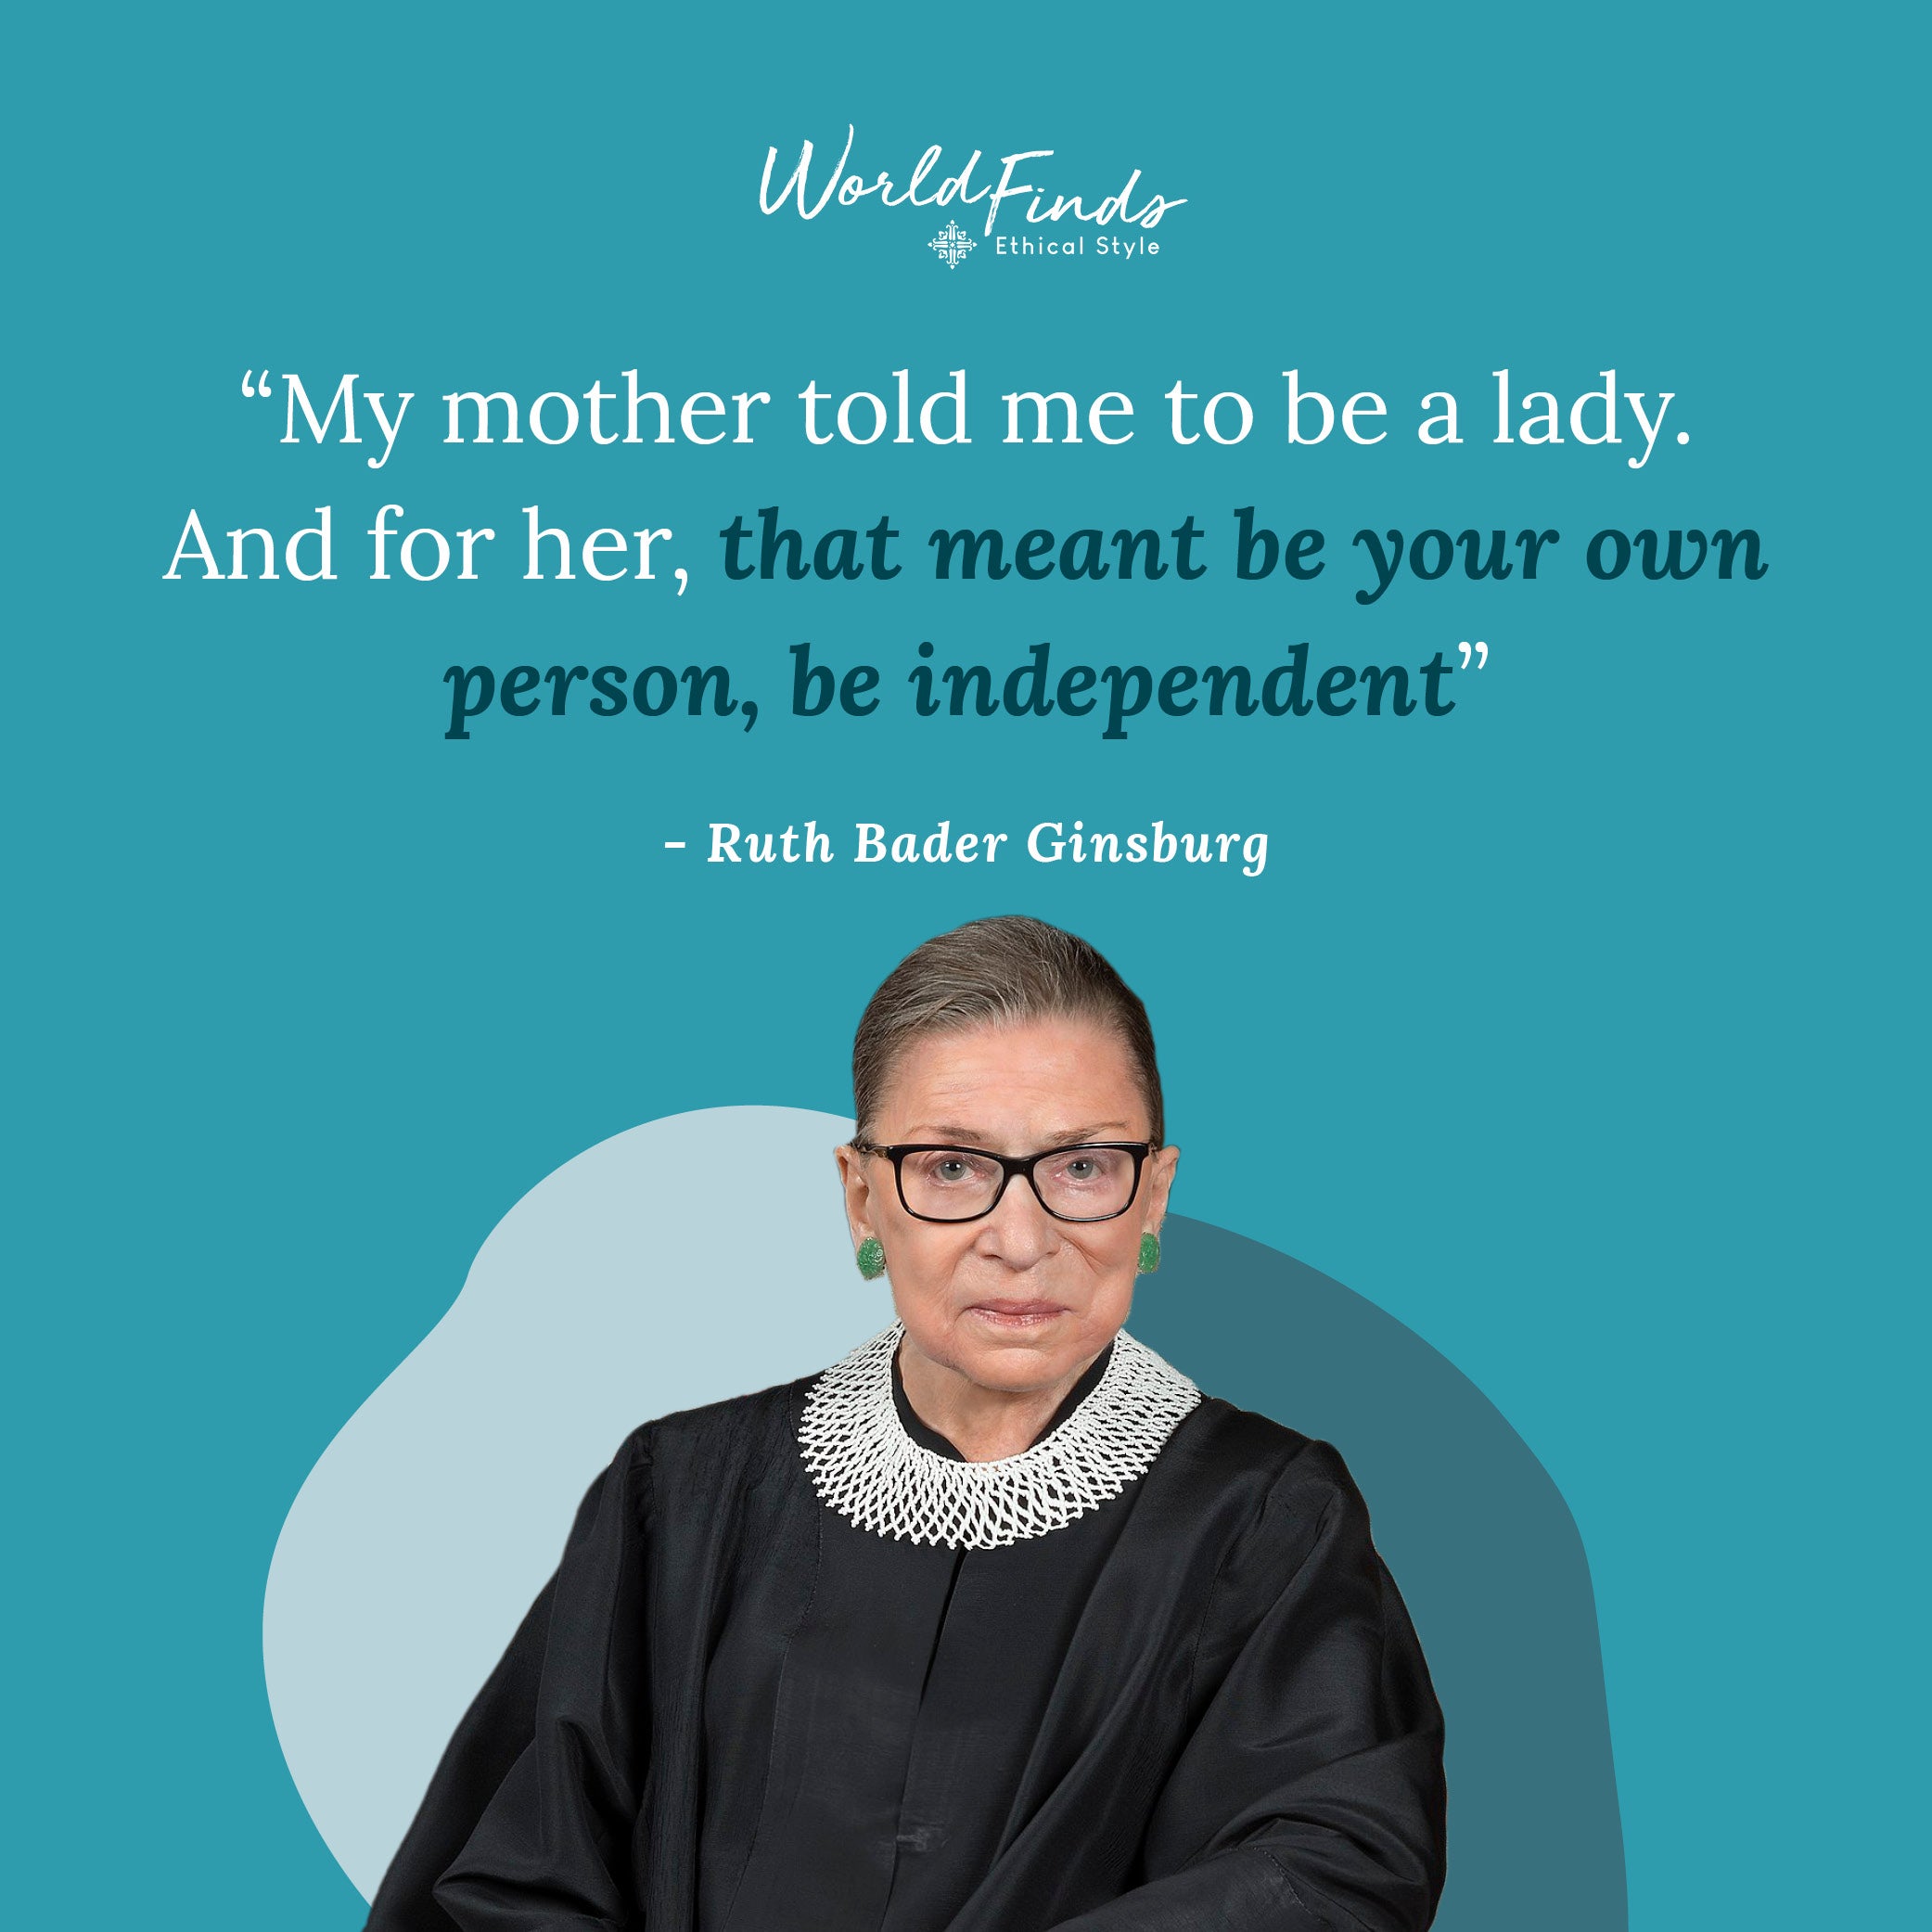 Quote from Ruth Bader Ginsburg, "My mother told me to be a lady. And for her, that meant be your own person, be independent."